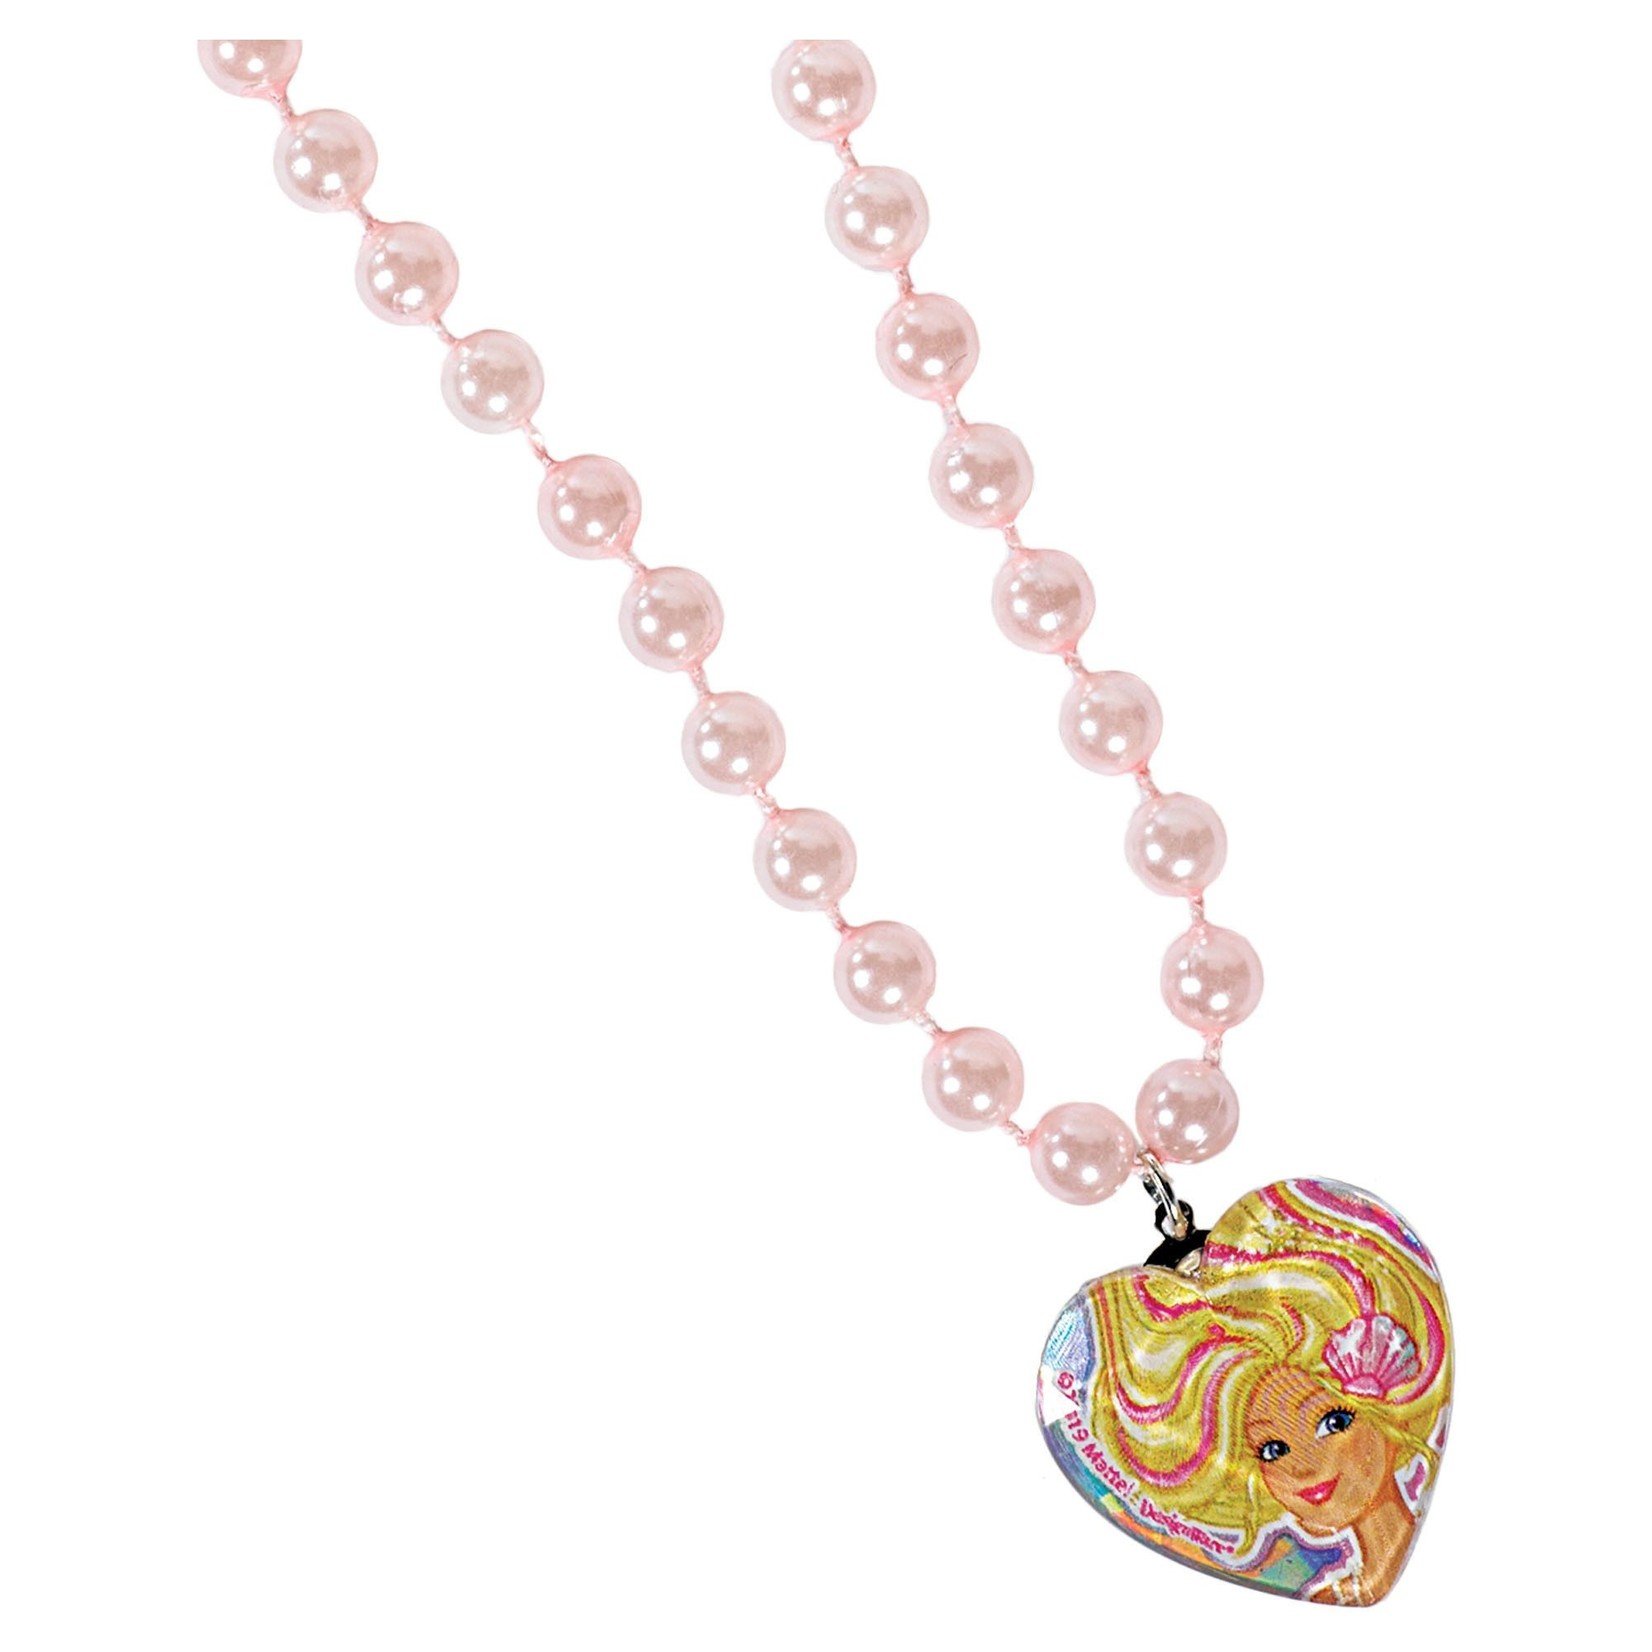 Necklace -Barbie Mermaid - 1pc - Victoria Party Store